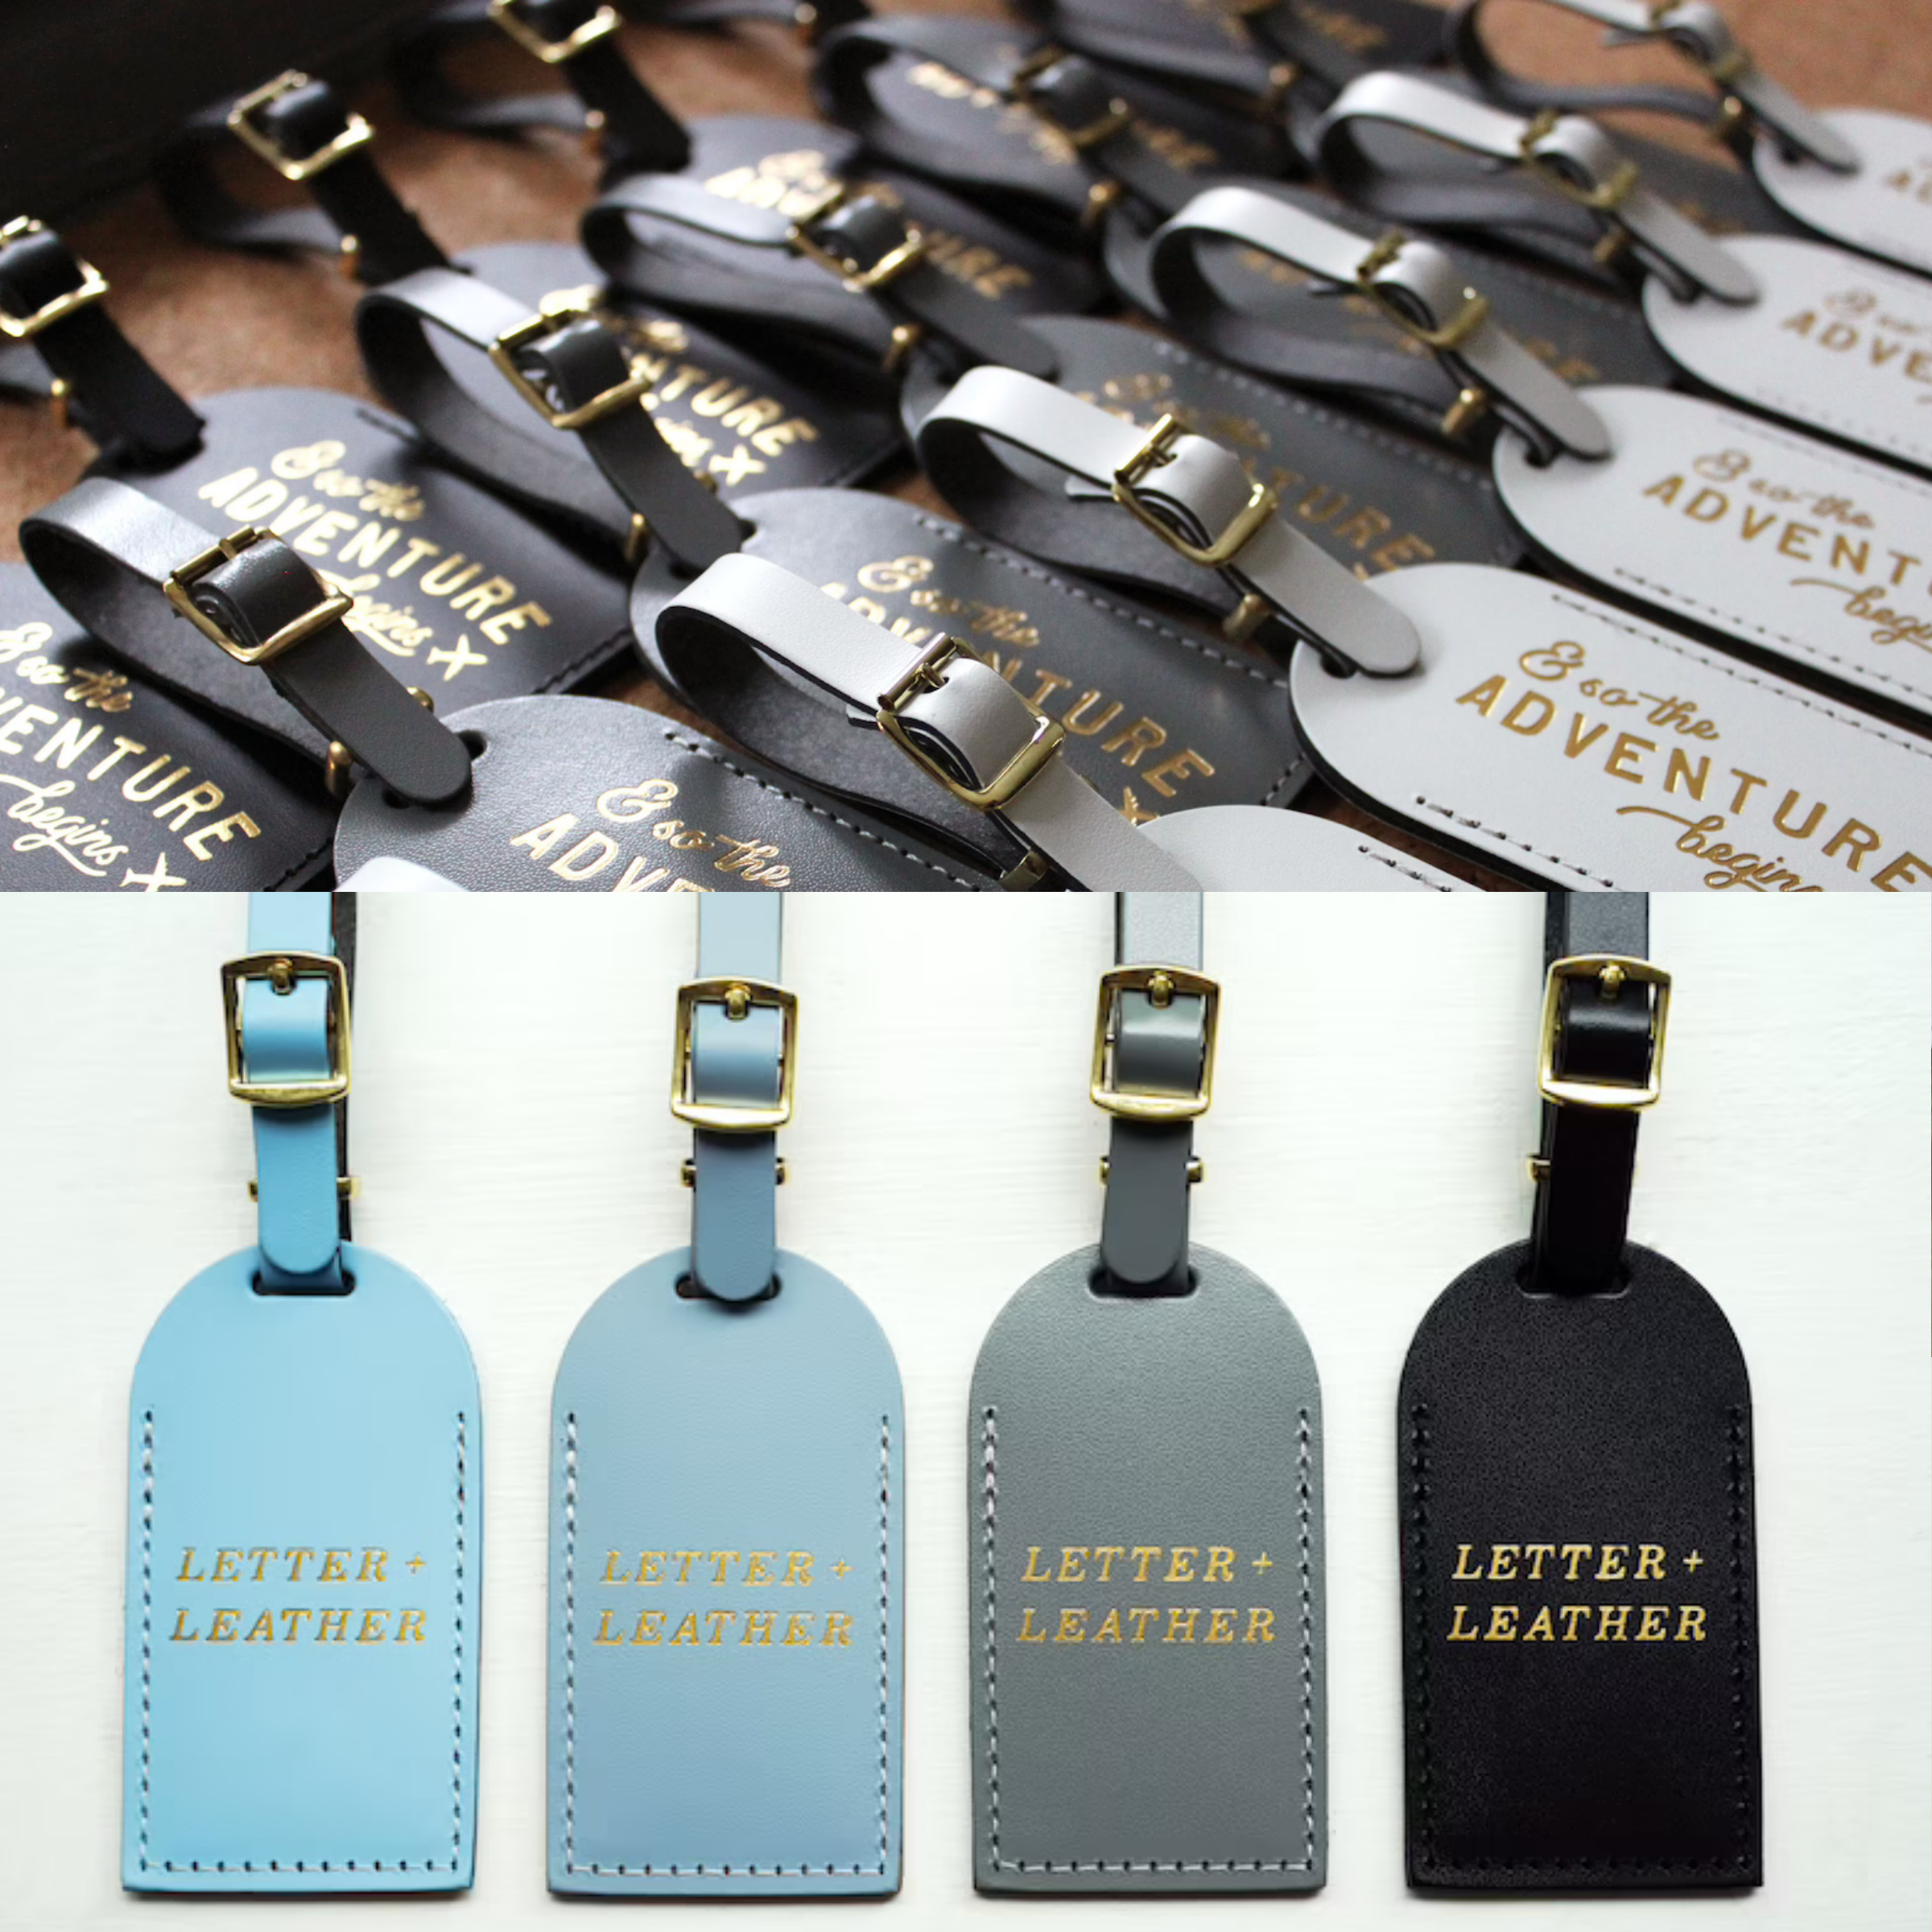 Luggage Tag Favors by Etsy